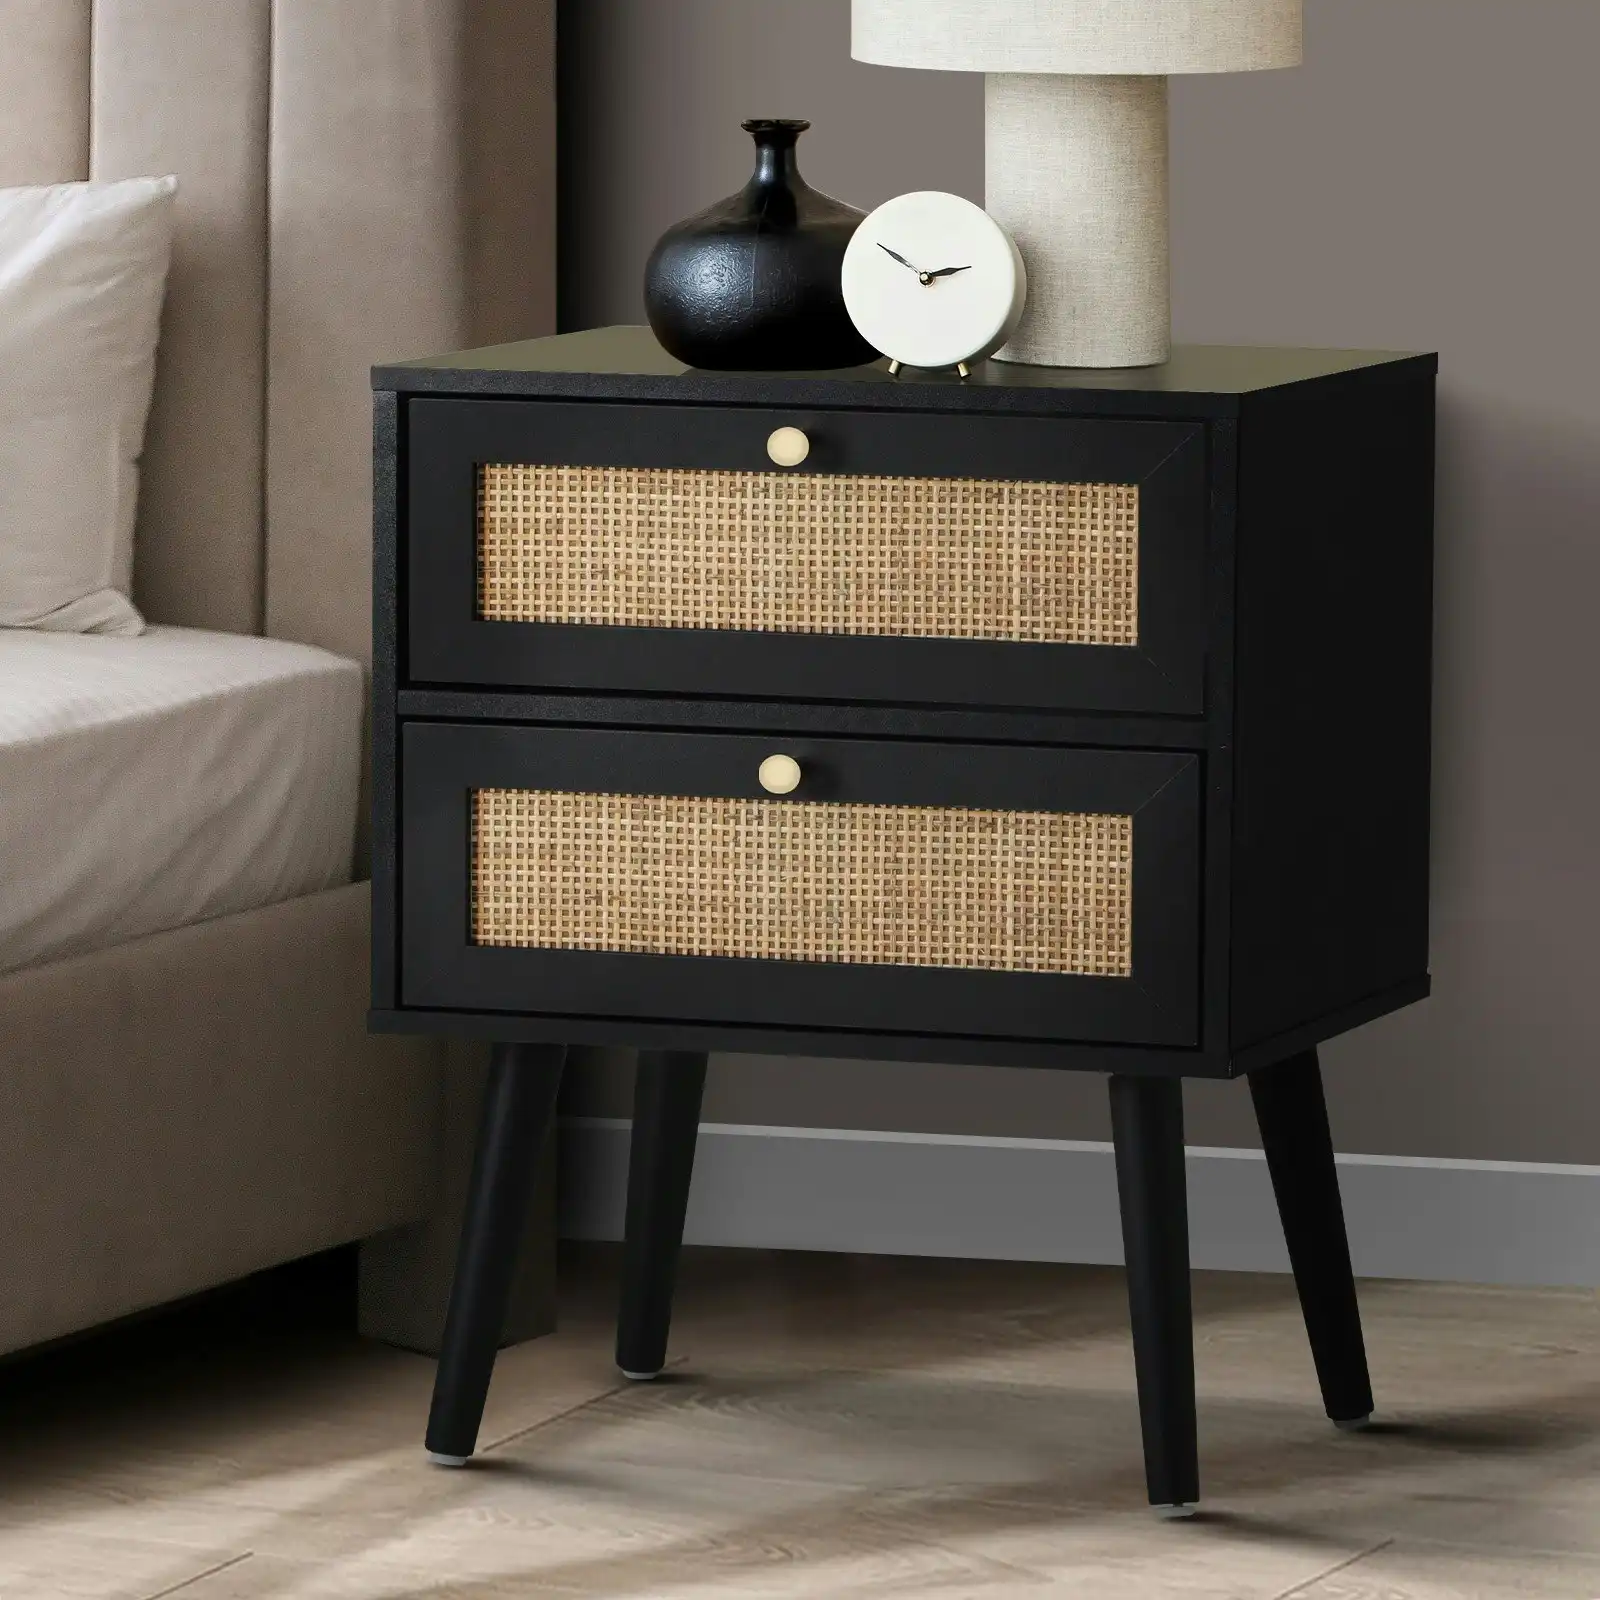 Oikiture Bedside Table Side Table 2 Drawers Storage Cabinet Nightstand Rattan